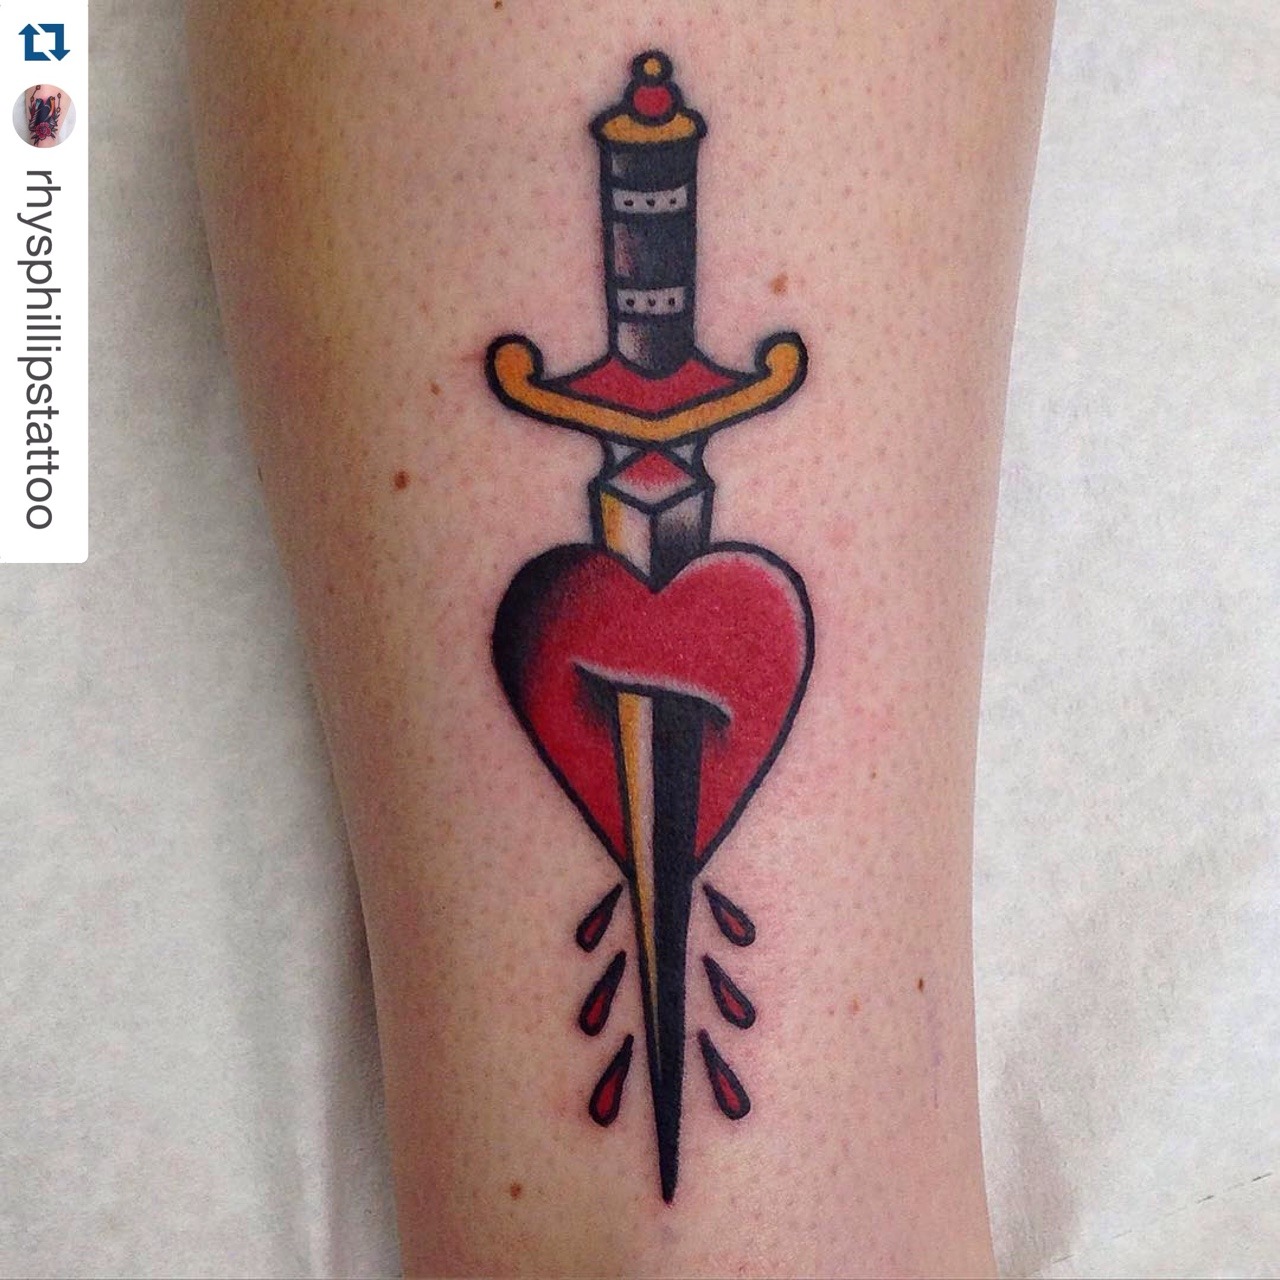 Dagger Tattoo Meaning  What do Dagger Tattoos Symbolize